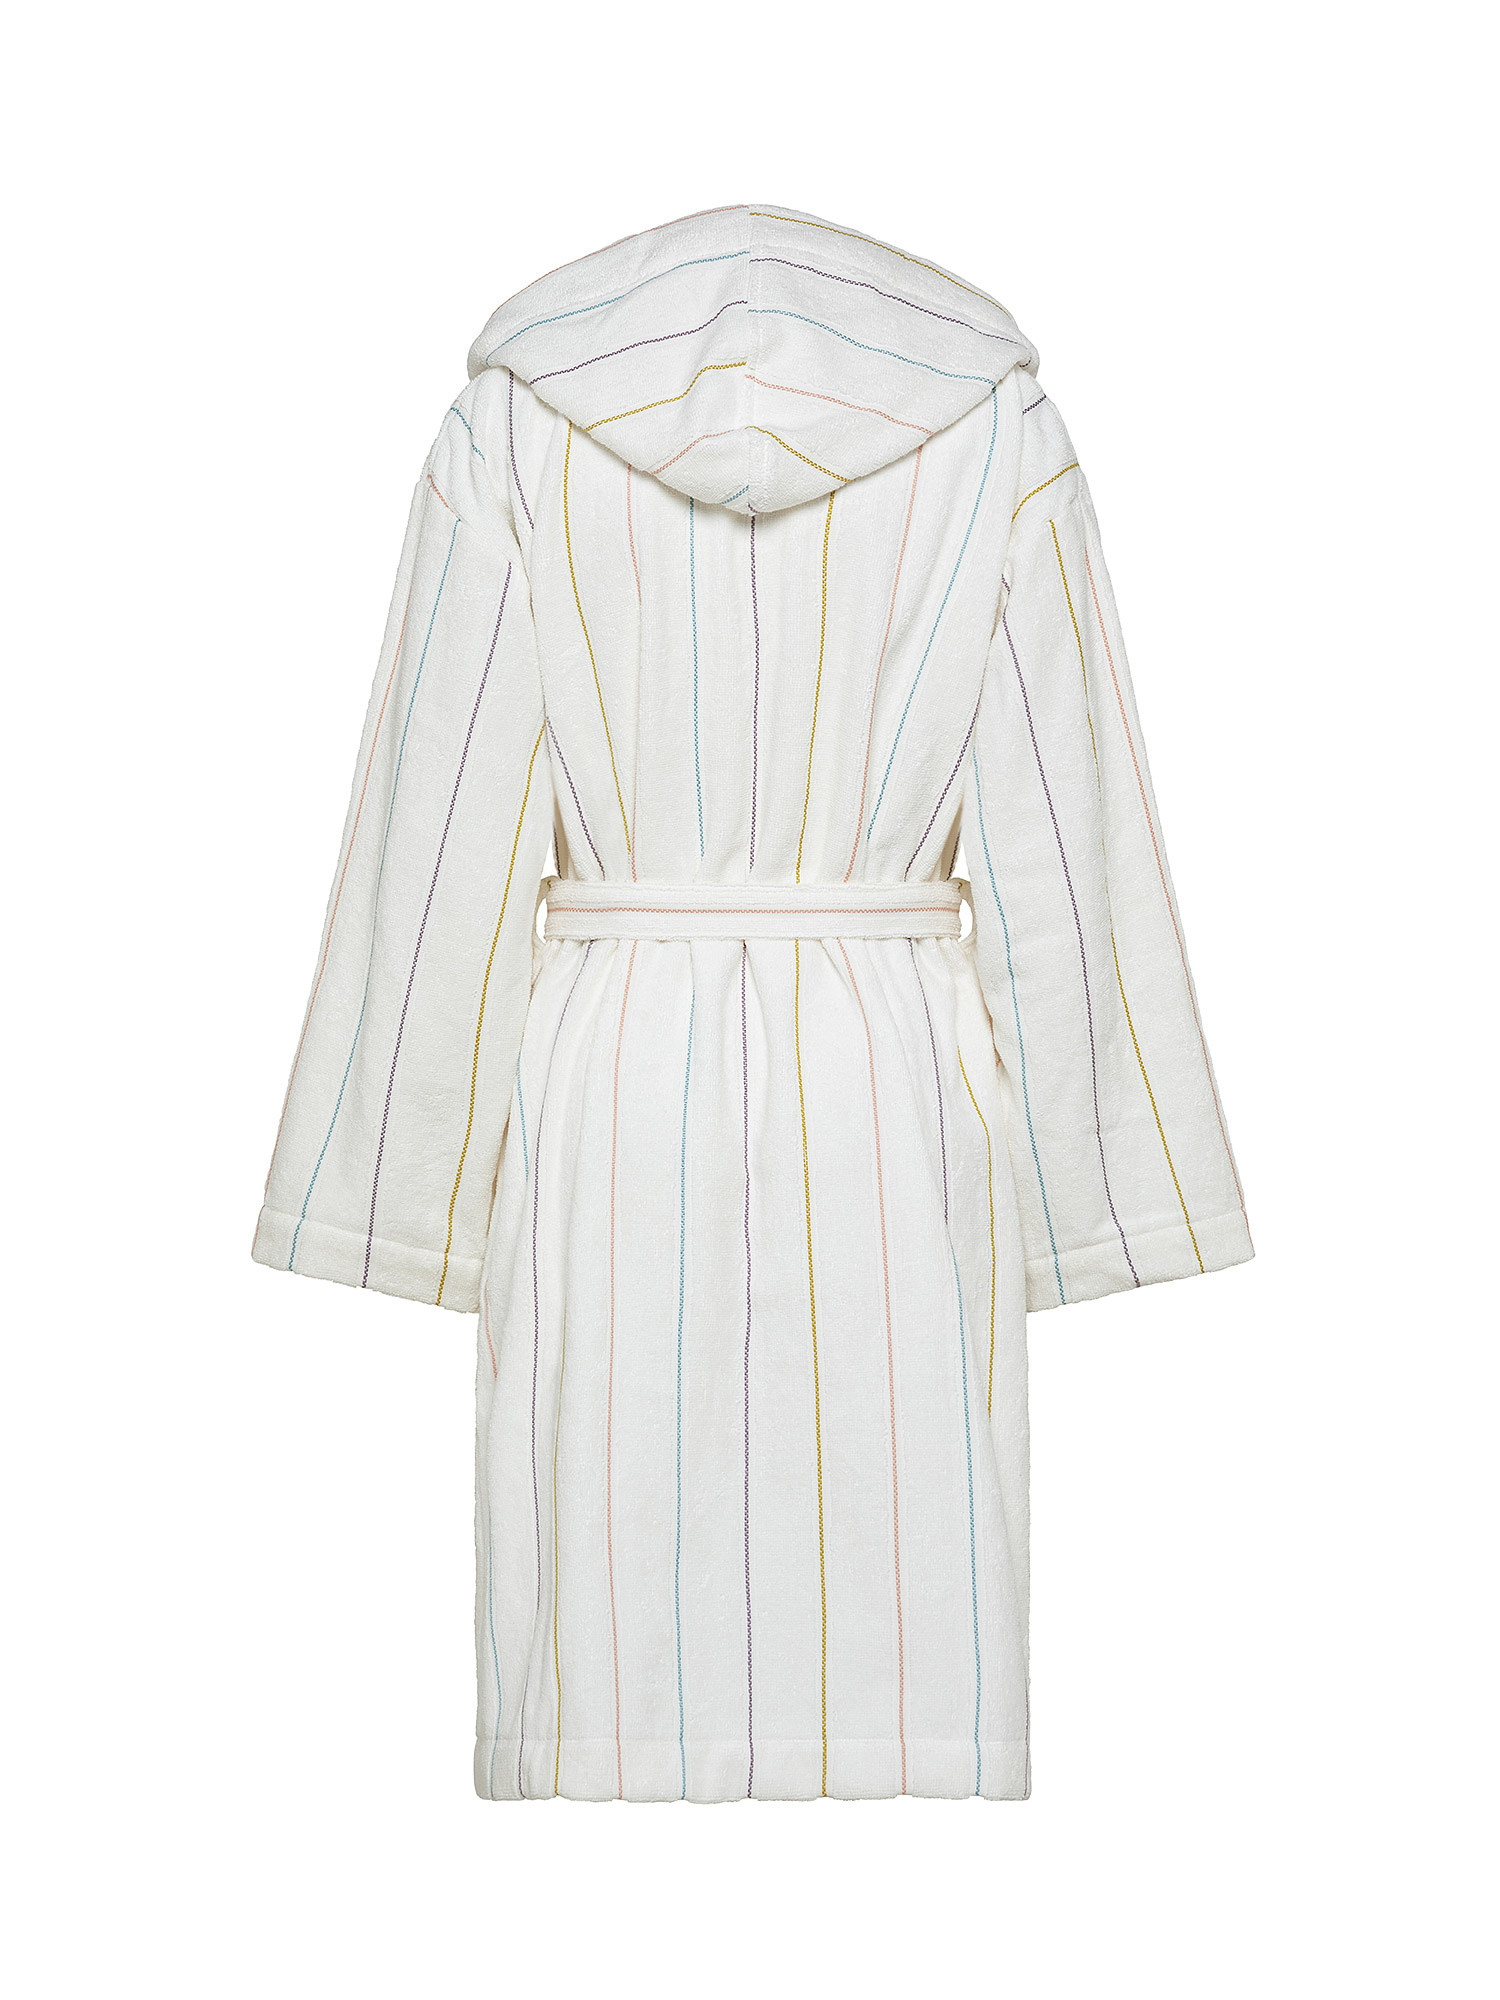 Terry cotton bathrobe with stitching, White, large image number 1